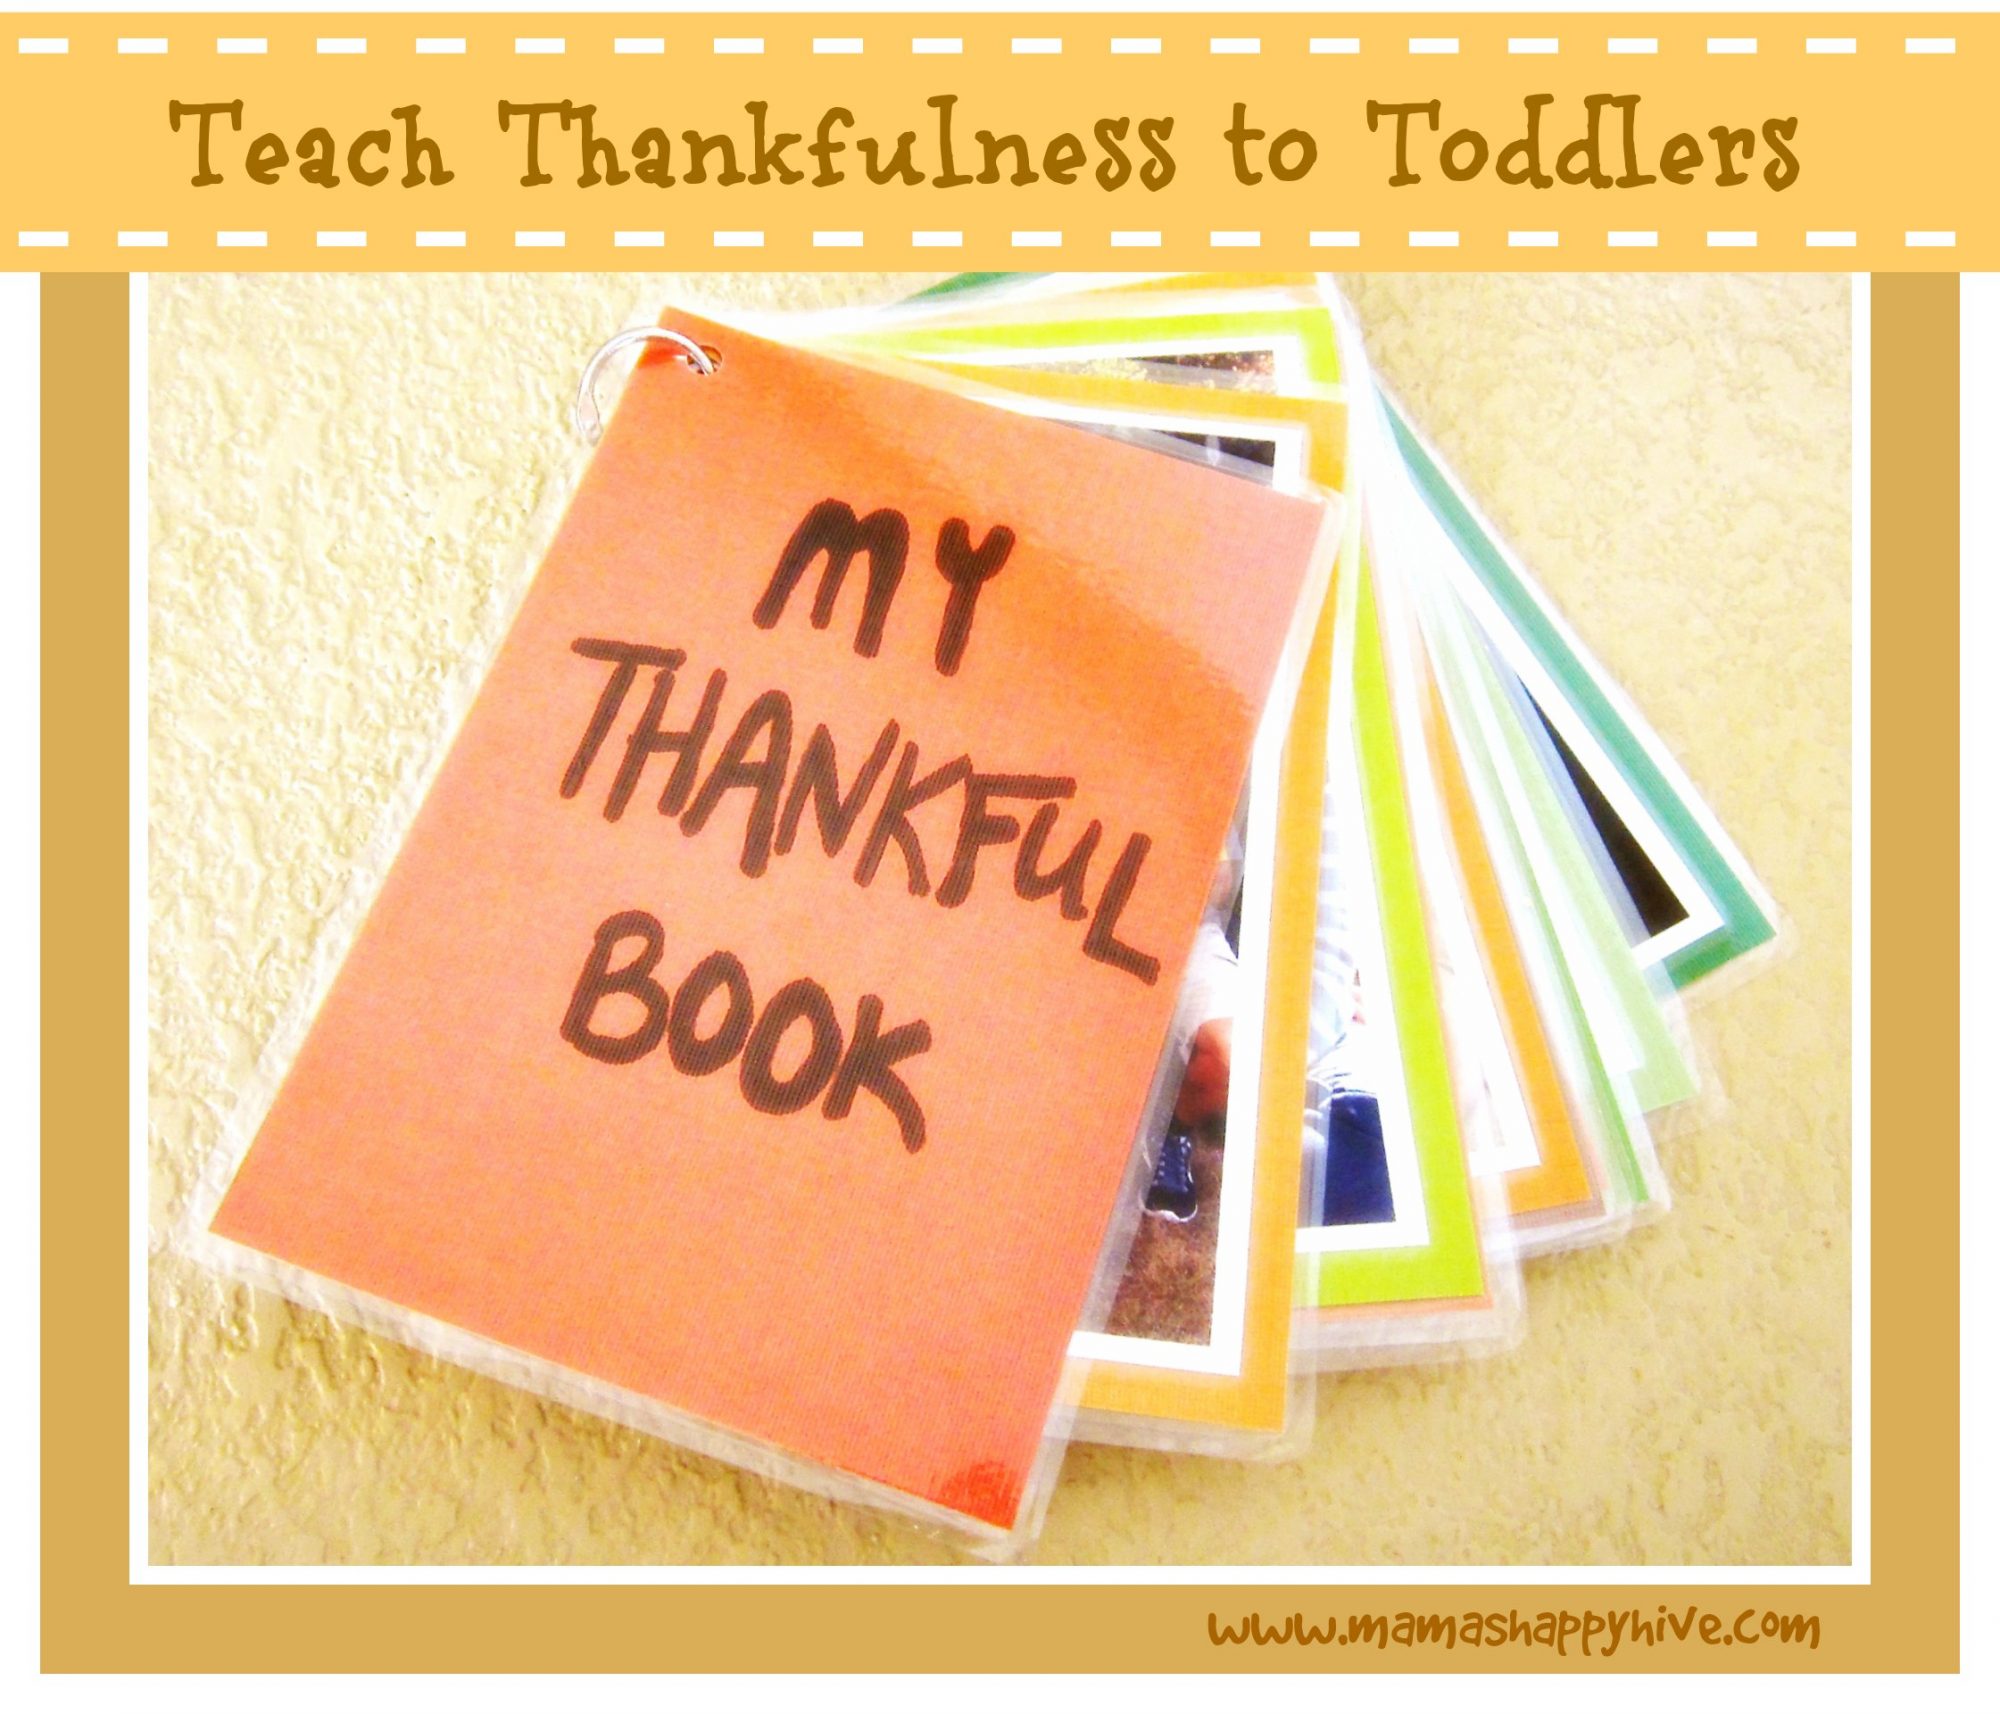 This endearing DIY Thankful Book is a tangible way for teaching toddlers thankfulness. It is laminated to be toddler proof for lots of hands-on playing. - www.mamashappyhive.com